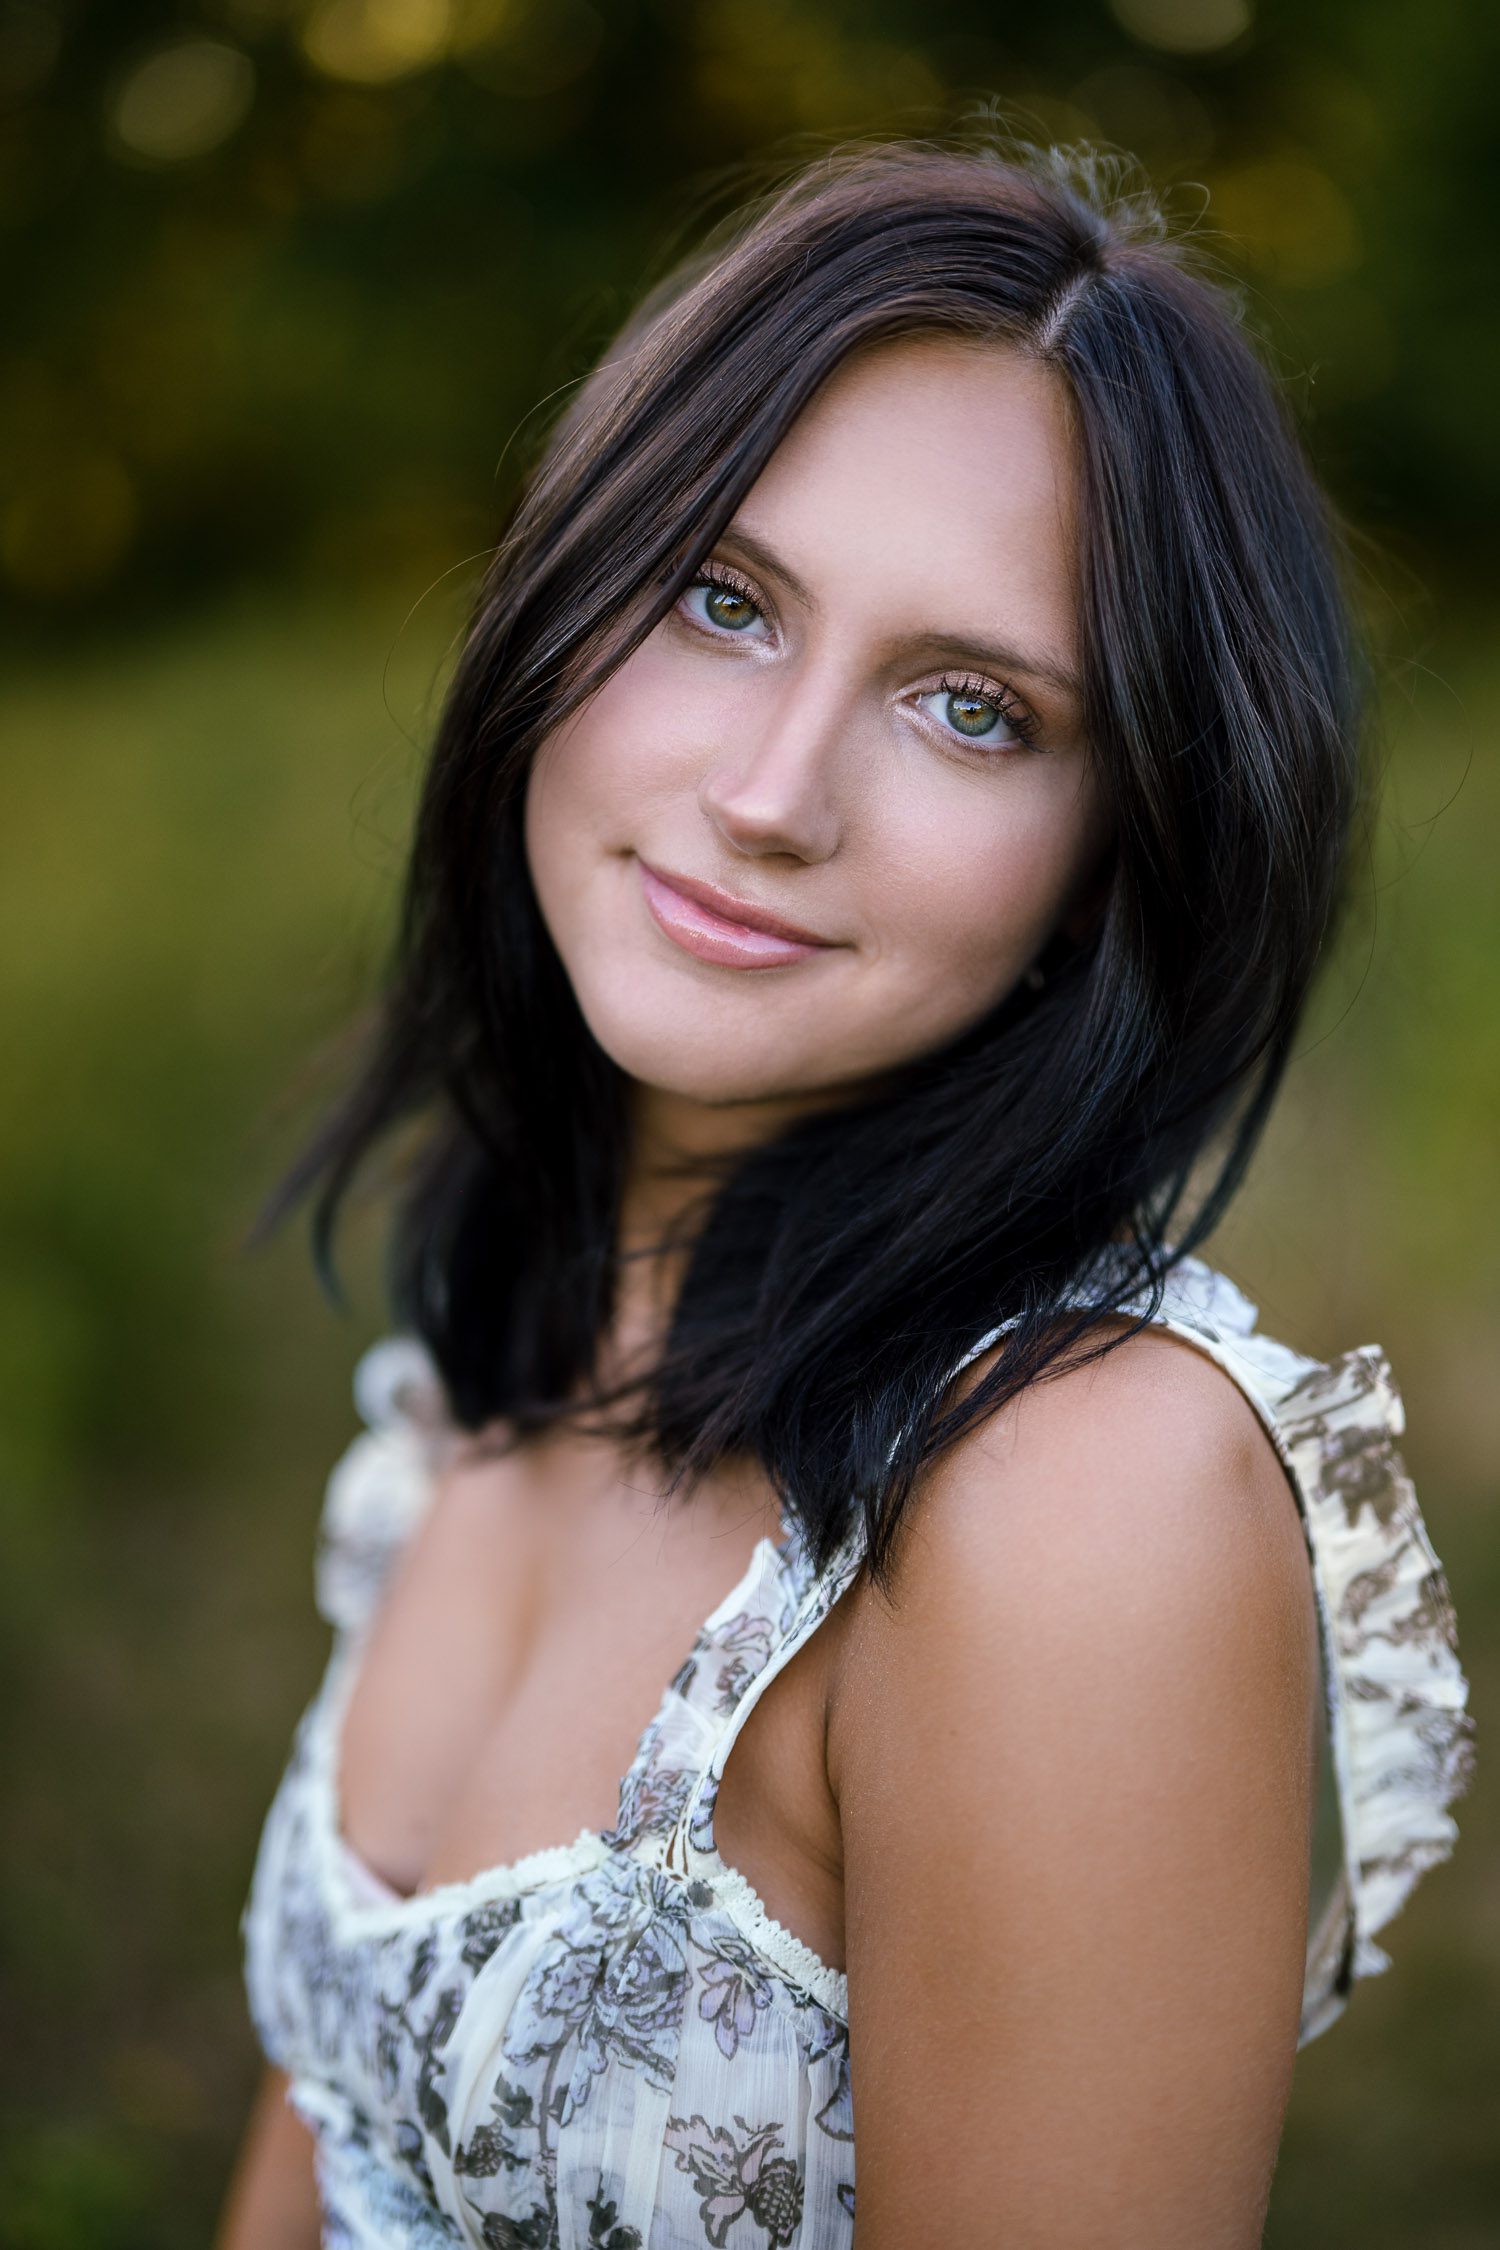 Senior girl with brunette hair and hazel eyes smiles at the camera with green nature behind her.